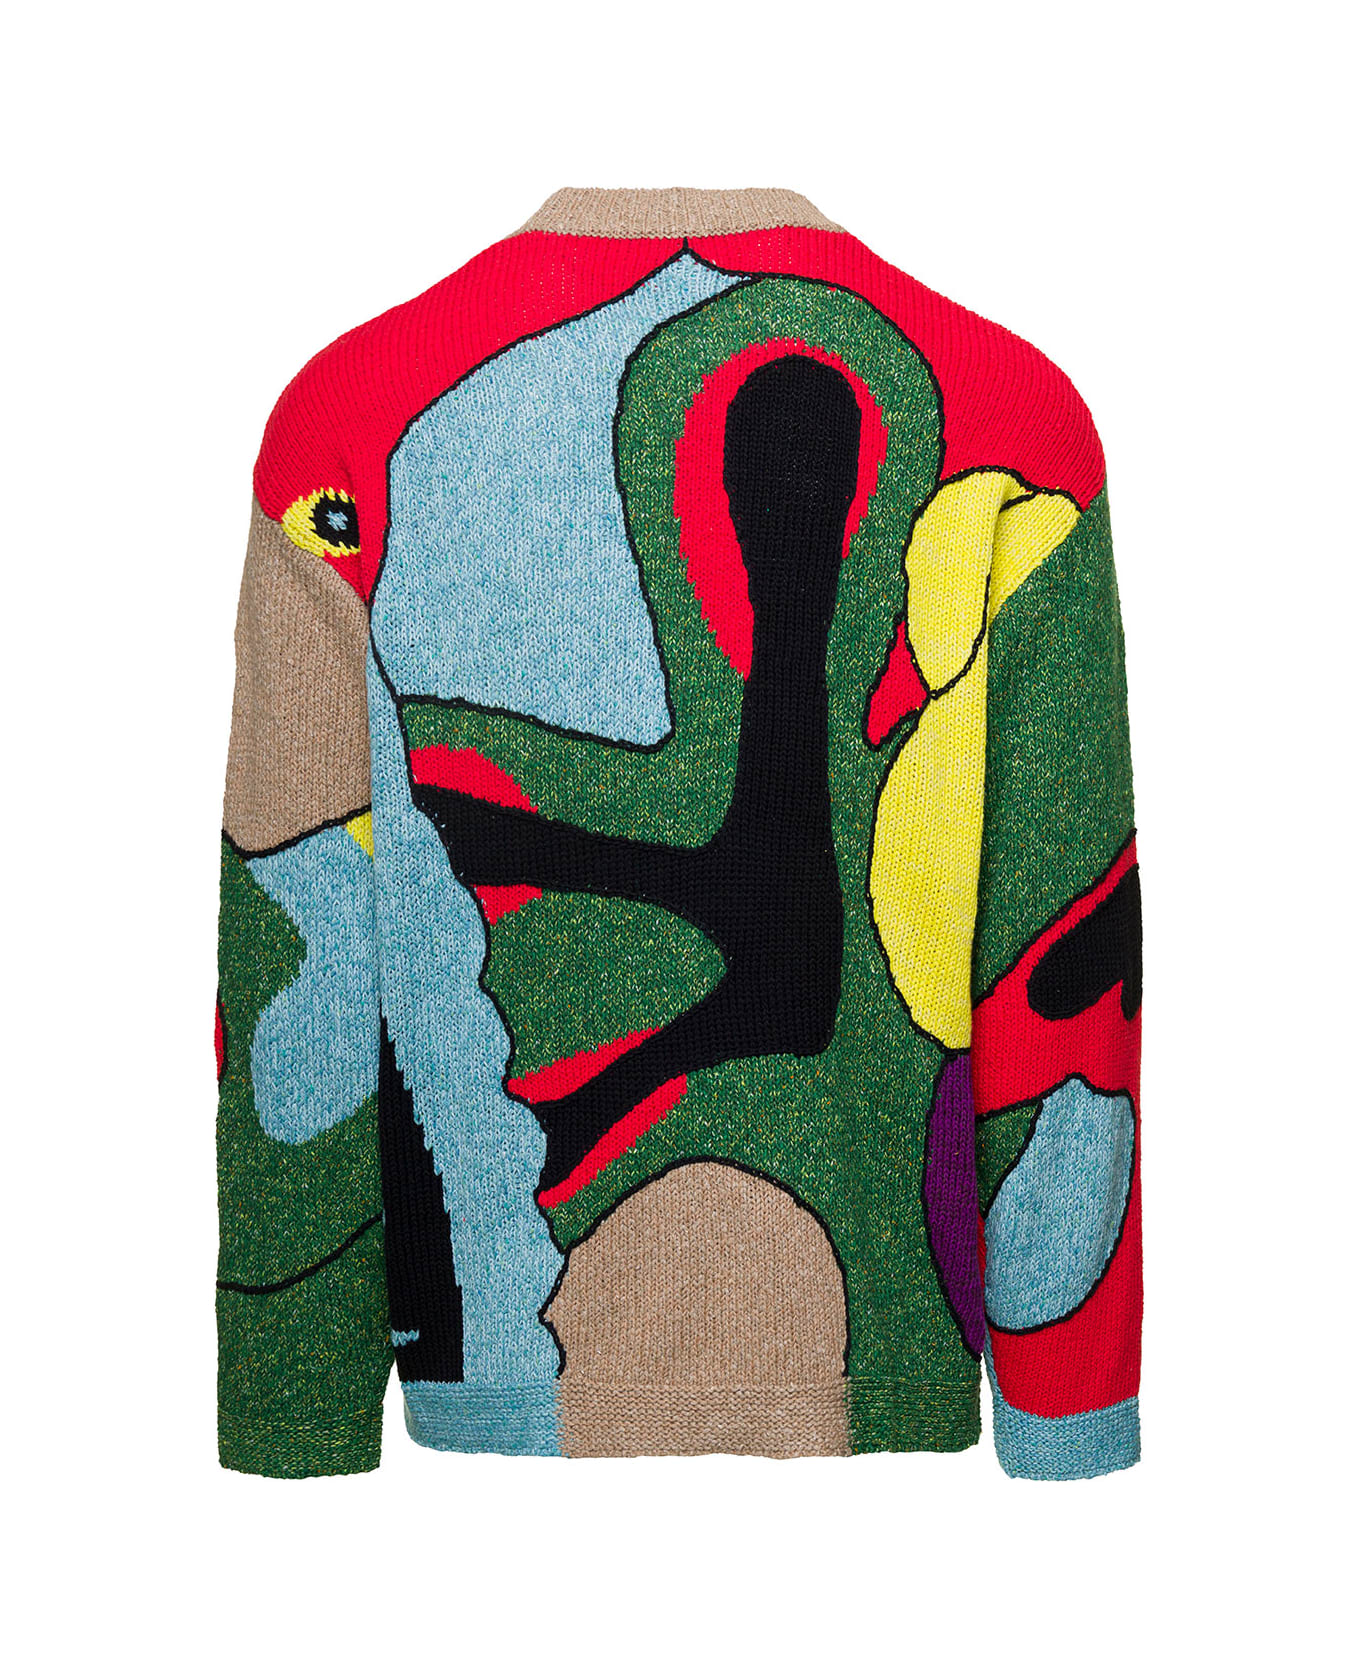 Kenzo Multicolor Crew Neck Knitted Jumper With Graphic Print All-over In Cotton Blend Man - Multicolor